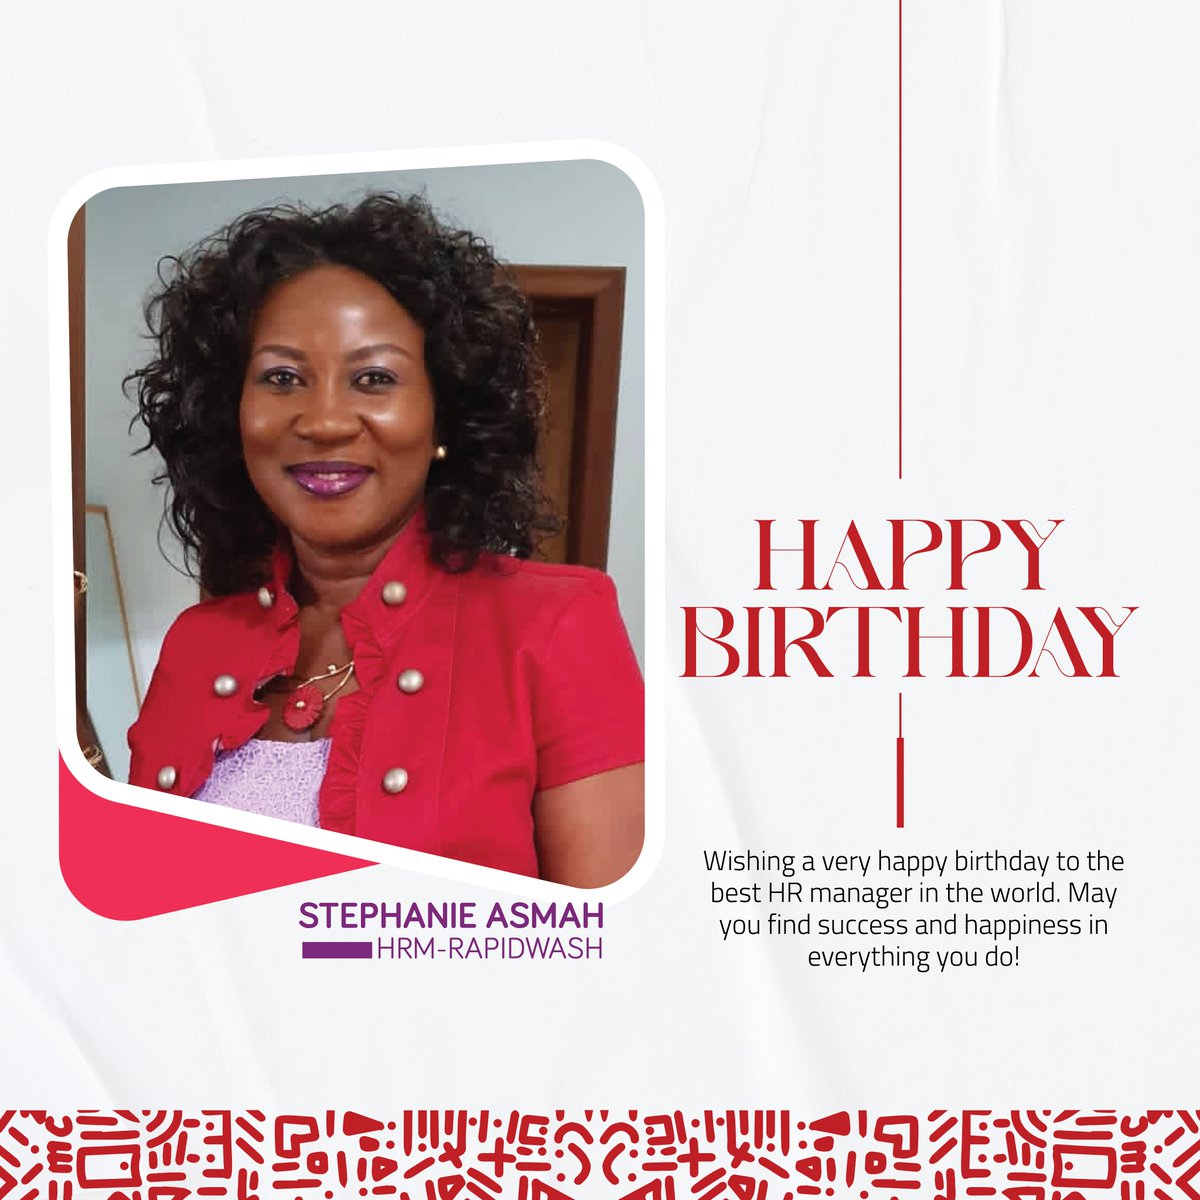 Wishing you a birthday full of complete joy. May this joy remain forever in your heart, and may you age gracefully. Happy Birthday our dear HR!🎂💃

#rapidwash #washmoreworryless #birthday #celebrations #ghana #laundryservice #shellfillingstation #totalfillingstation #anniversary